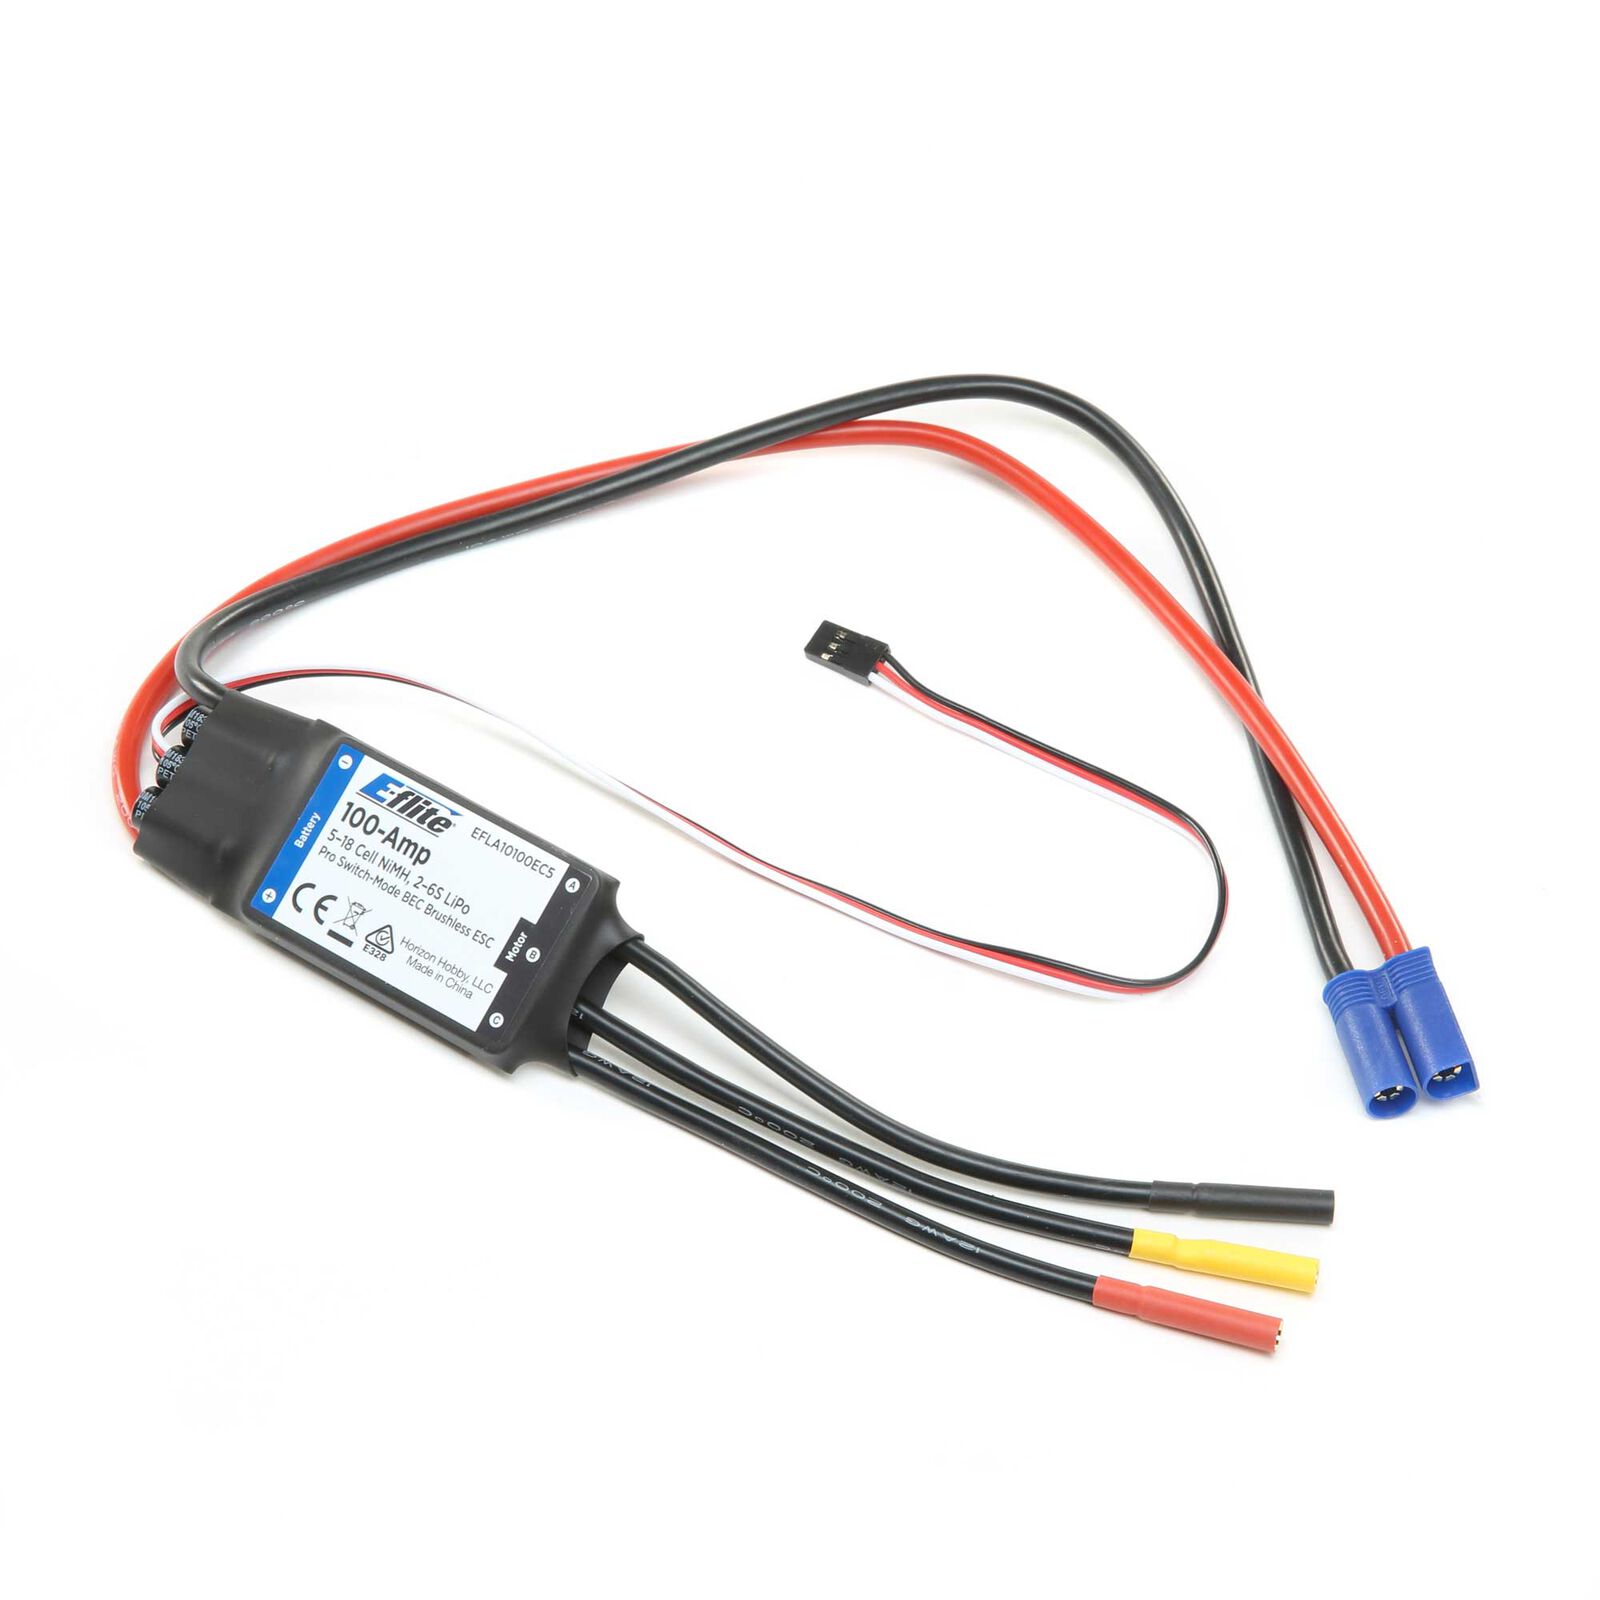 100-Amp Pro Switch-Mode BEC Brushless ESC with 270mm Lead: EC5